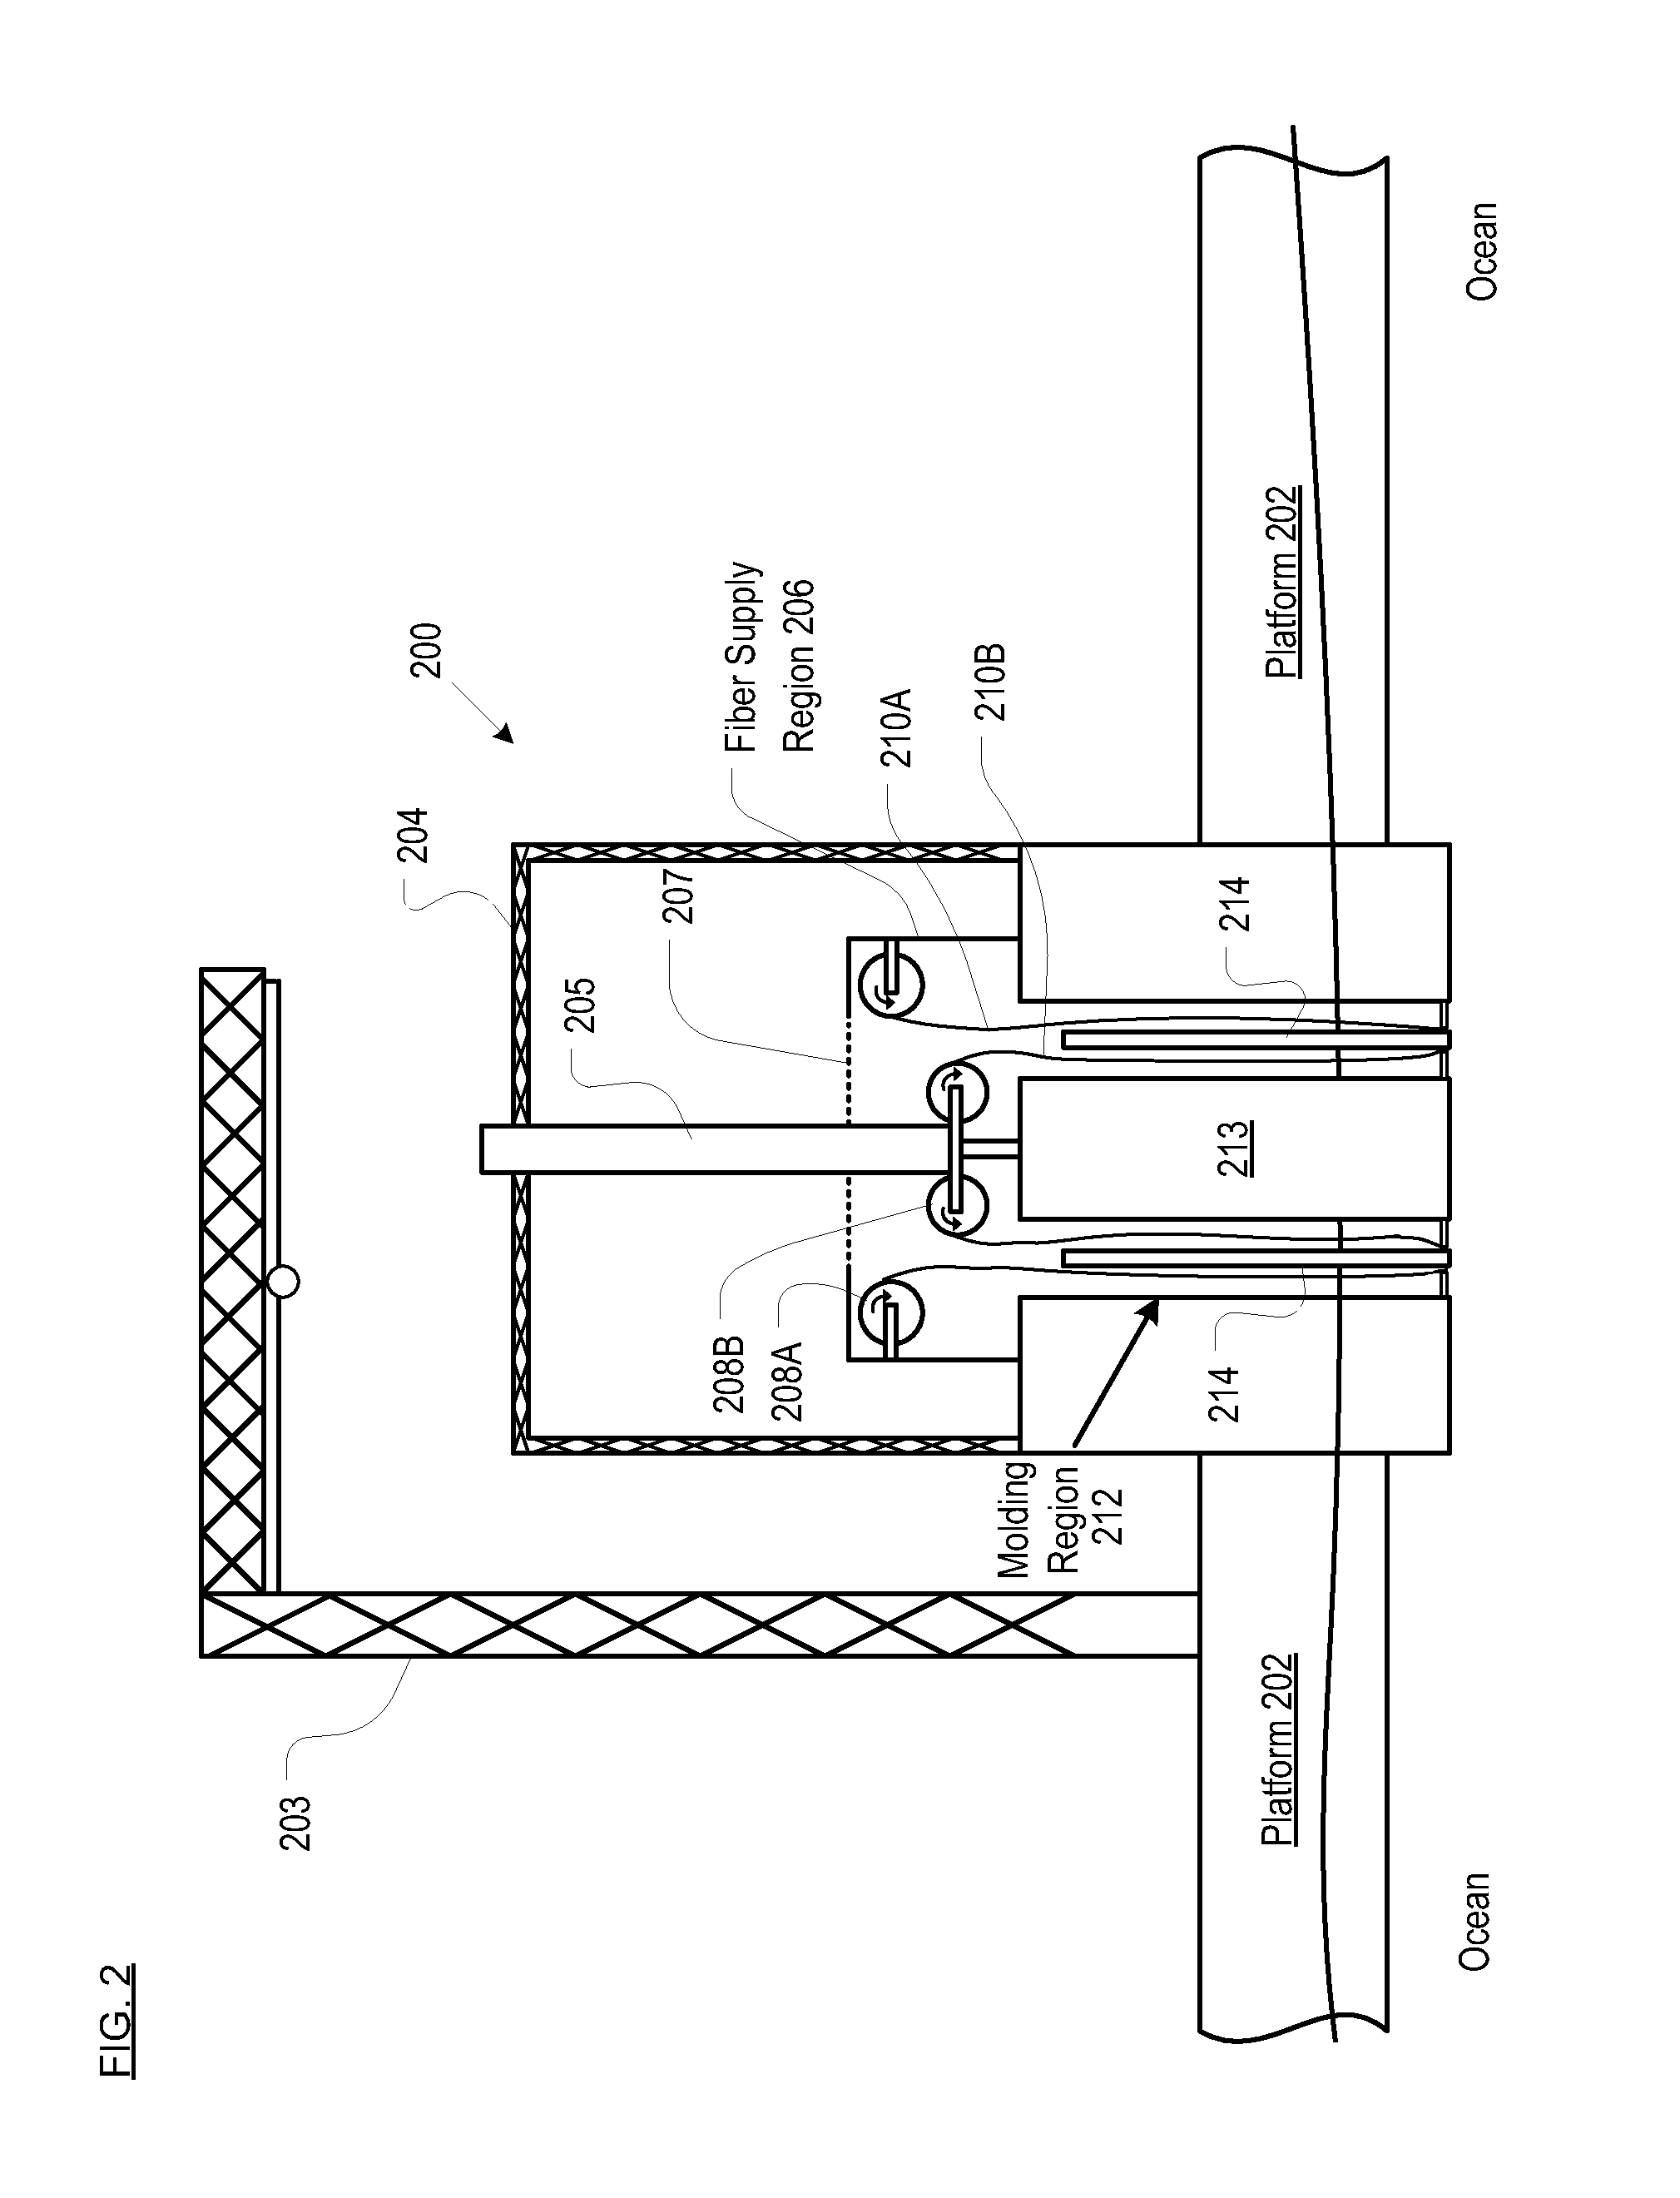 Process and apparatus for molding continuous-fiber composite articles